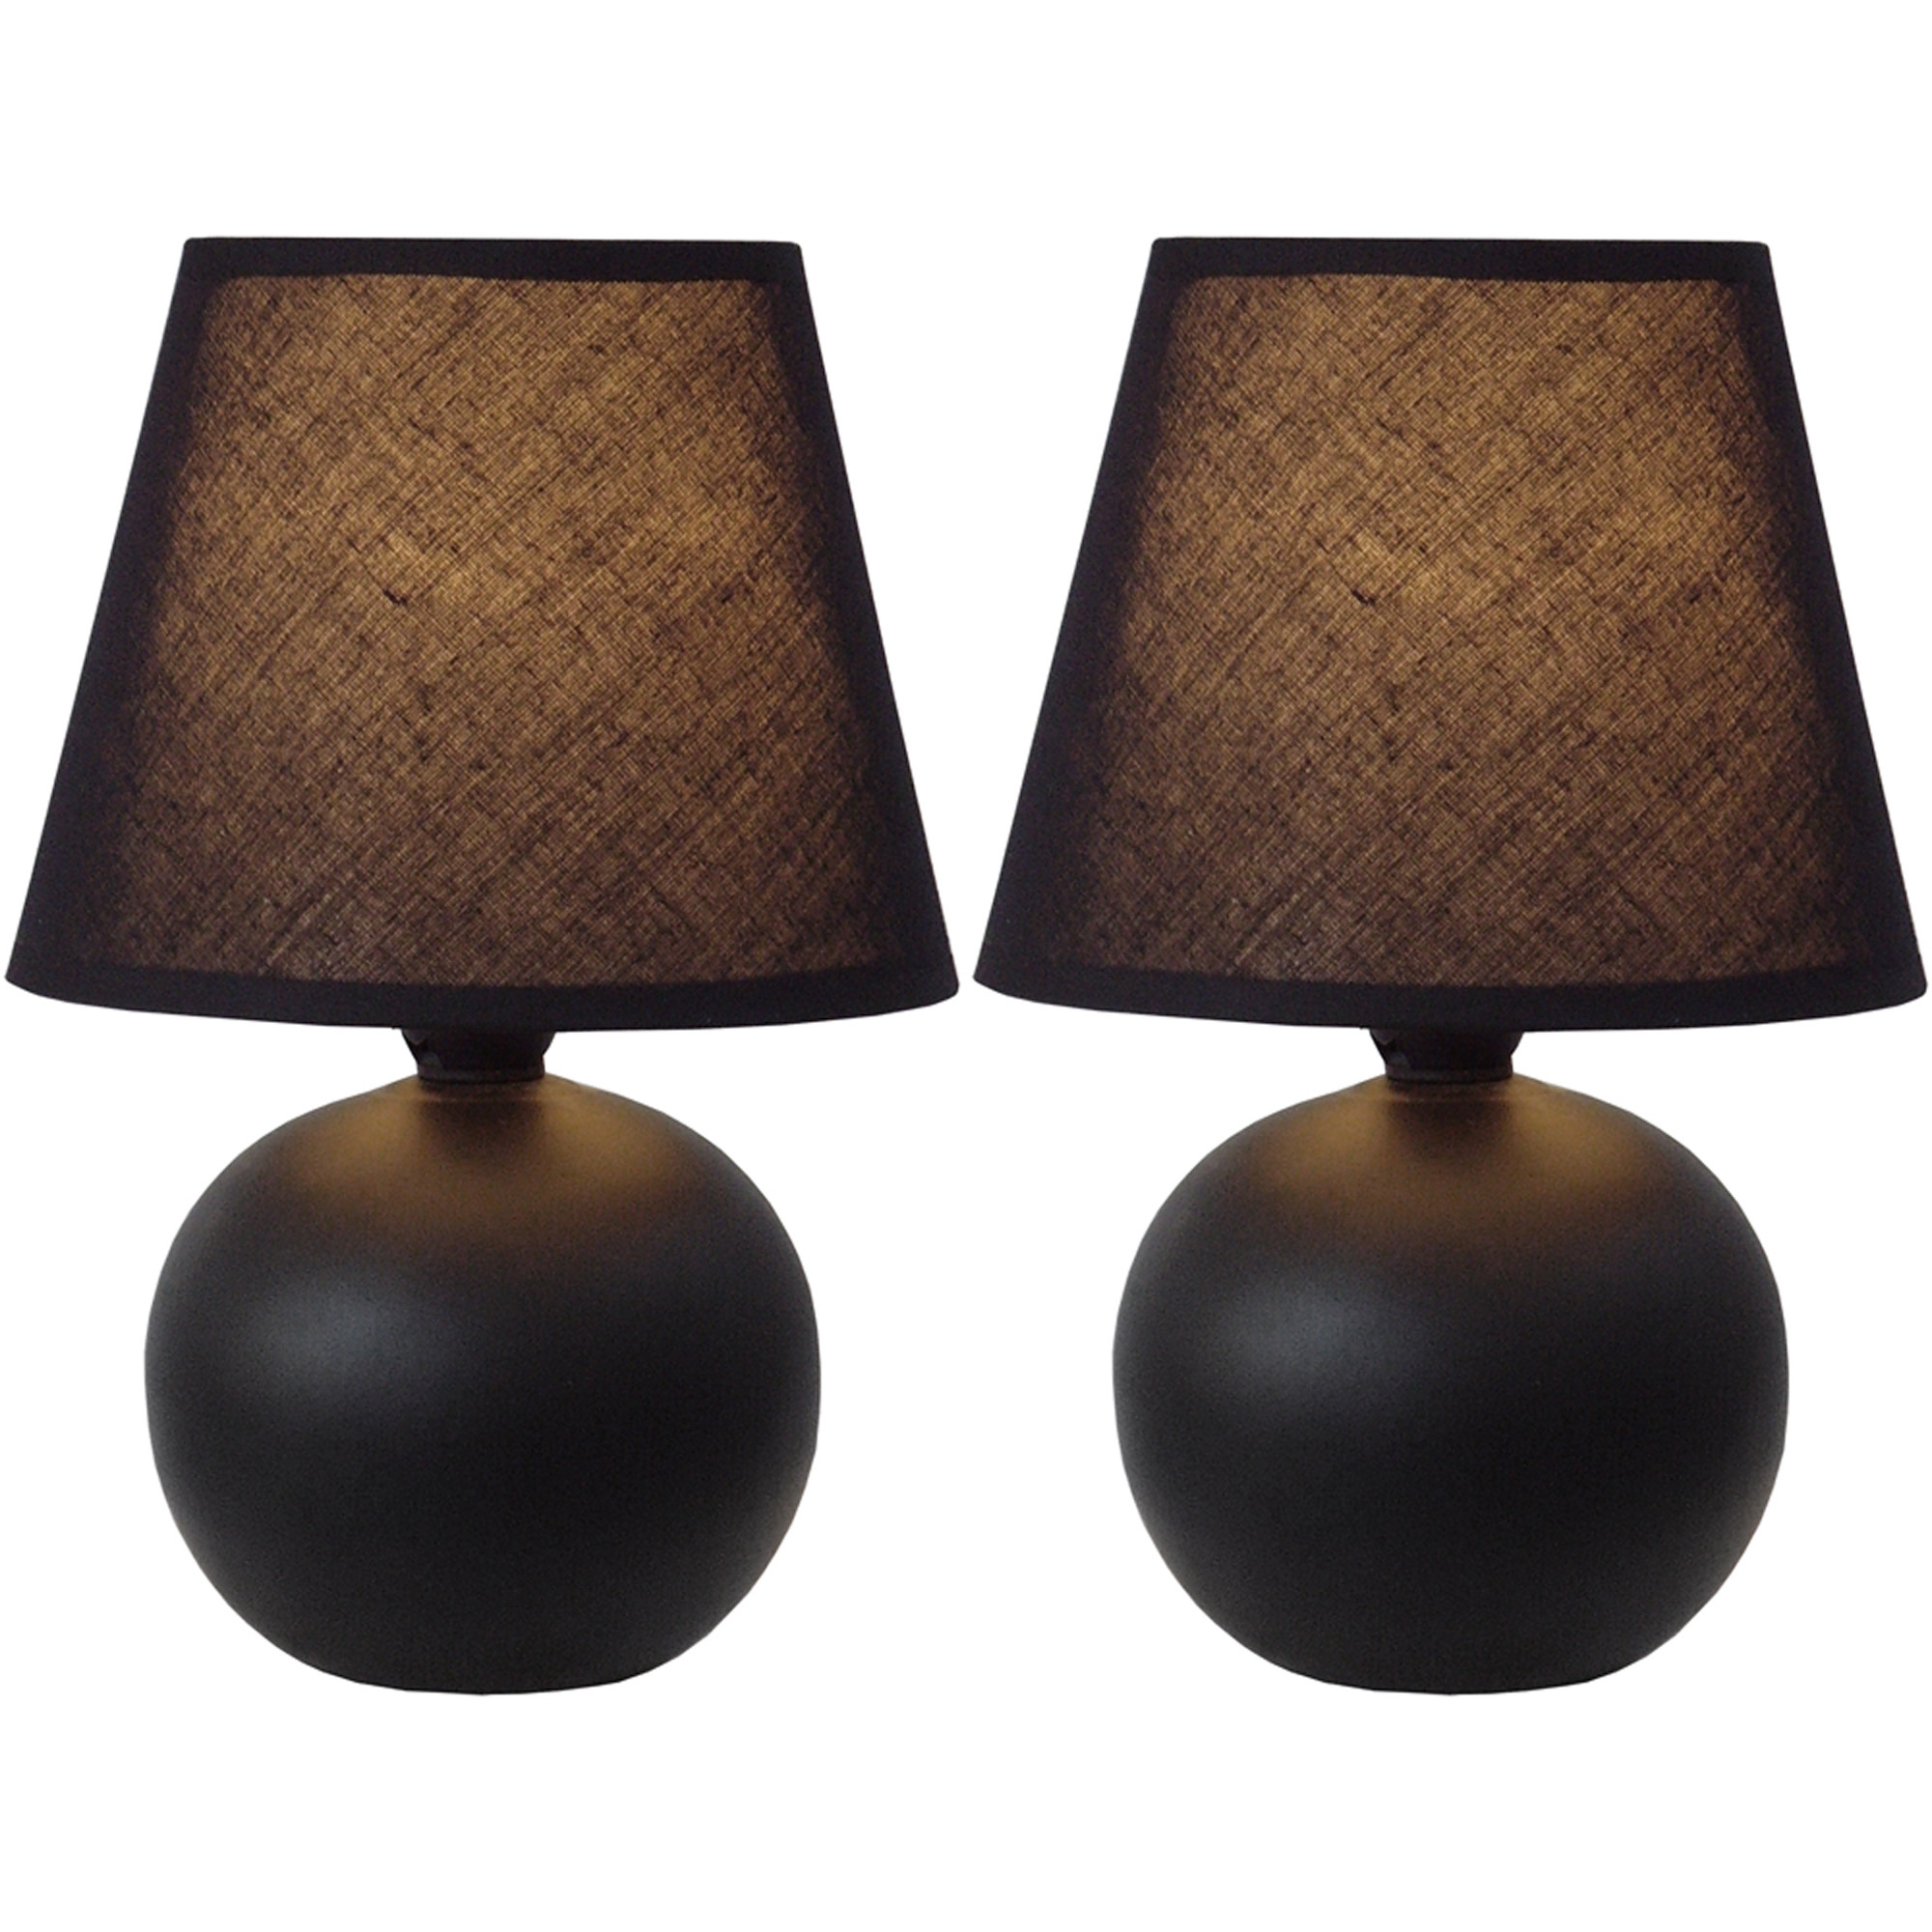 Living Room Table Lamps Sets